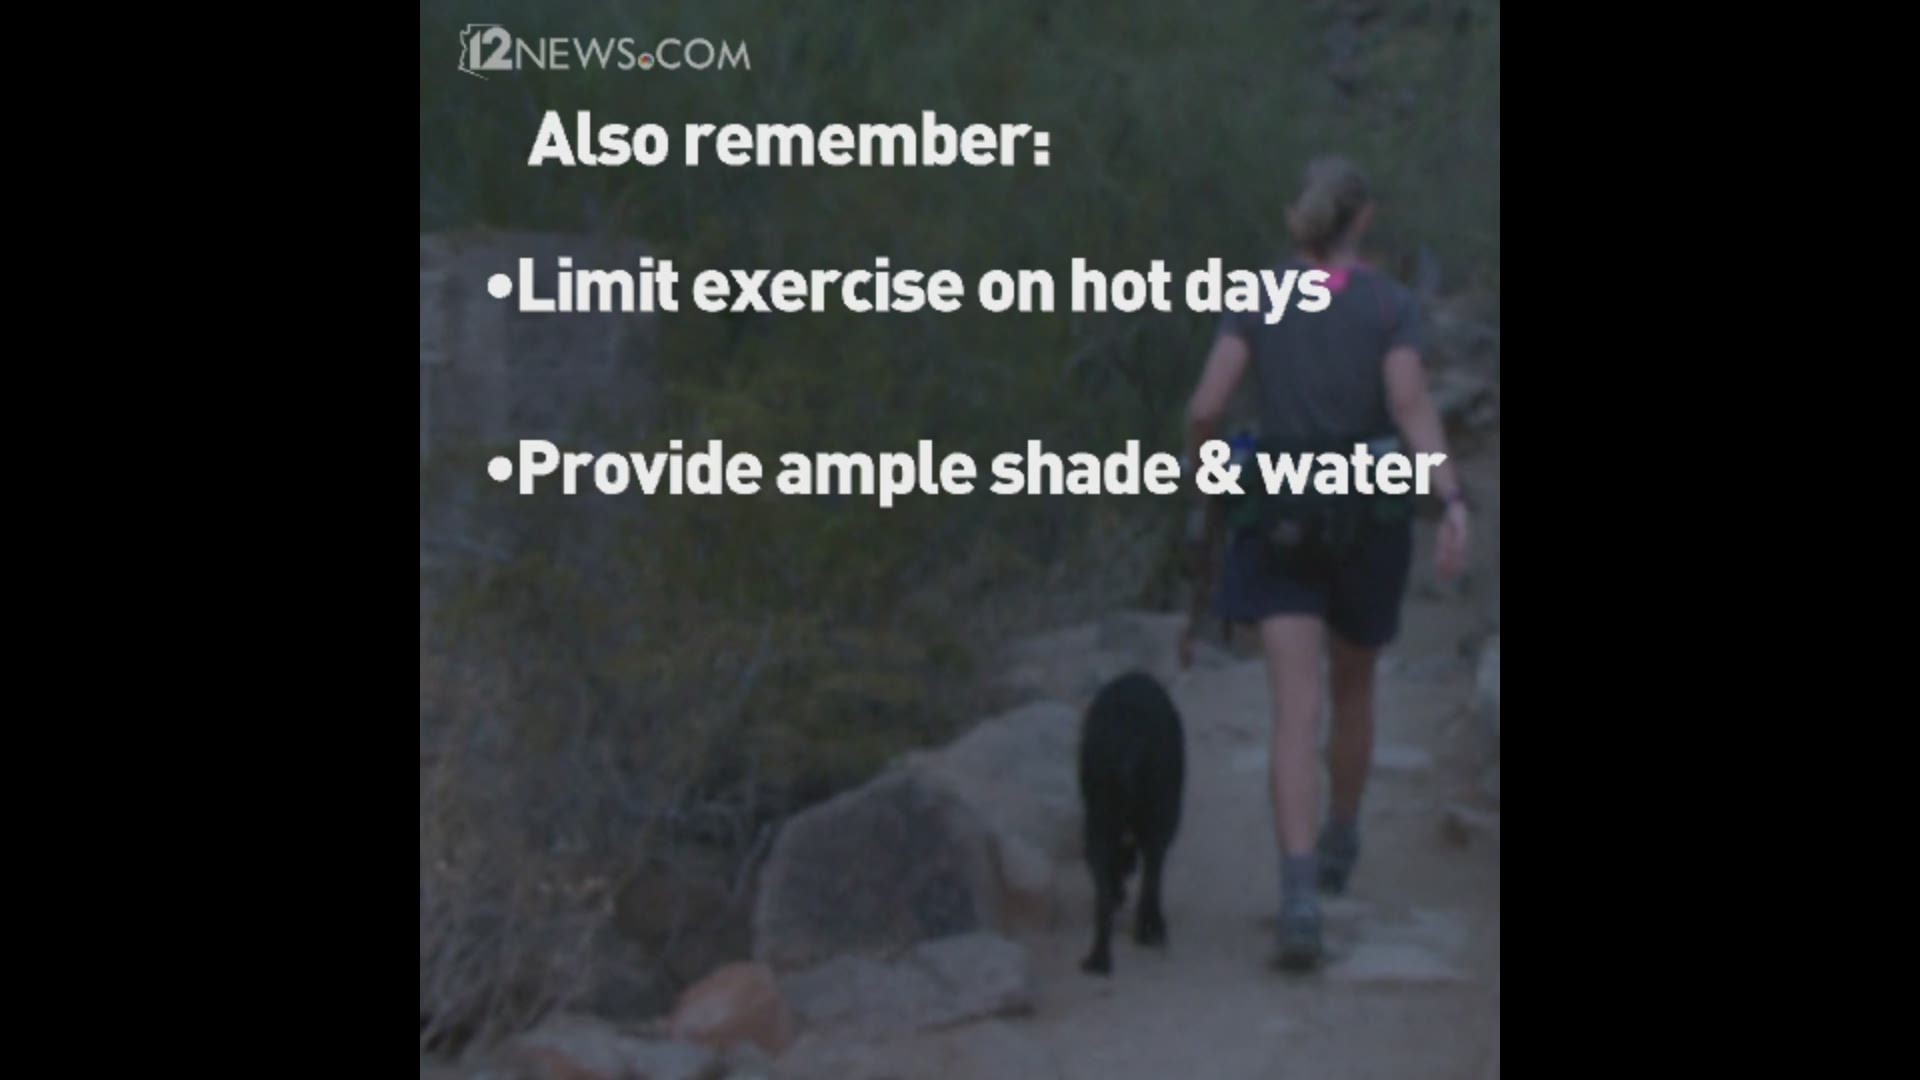 Now that Phoenix has reached triple-digit temperatures, the city is reminding dog owners that their four-legged exercise buddies aren't allowed on hiking trails when the temperature is over 100 degrees.